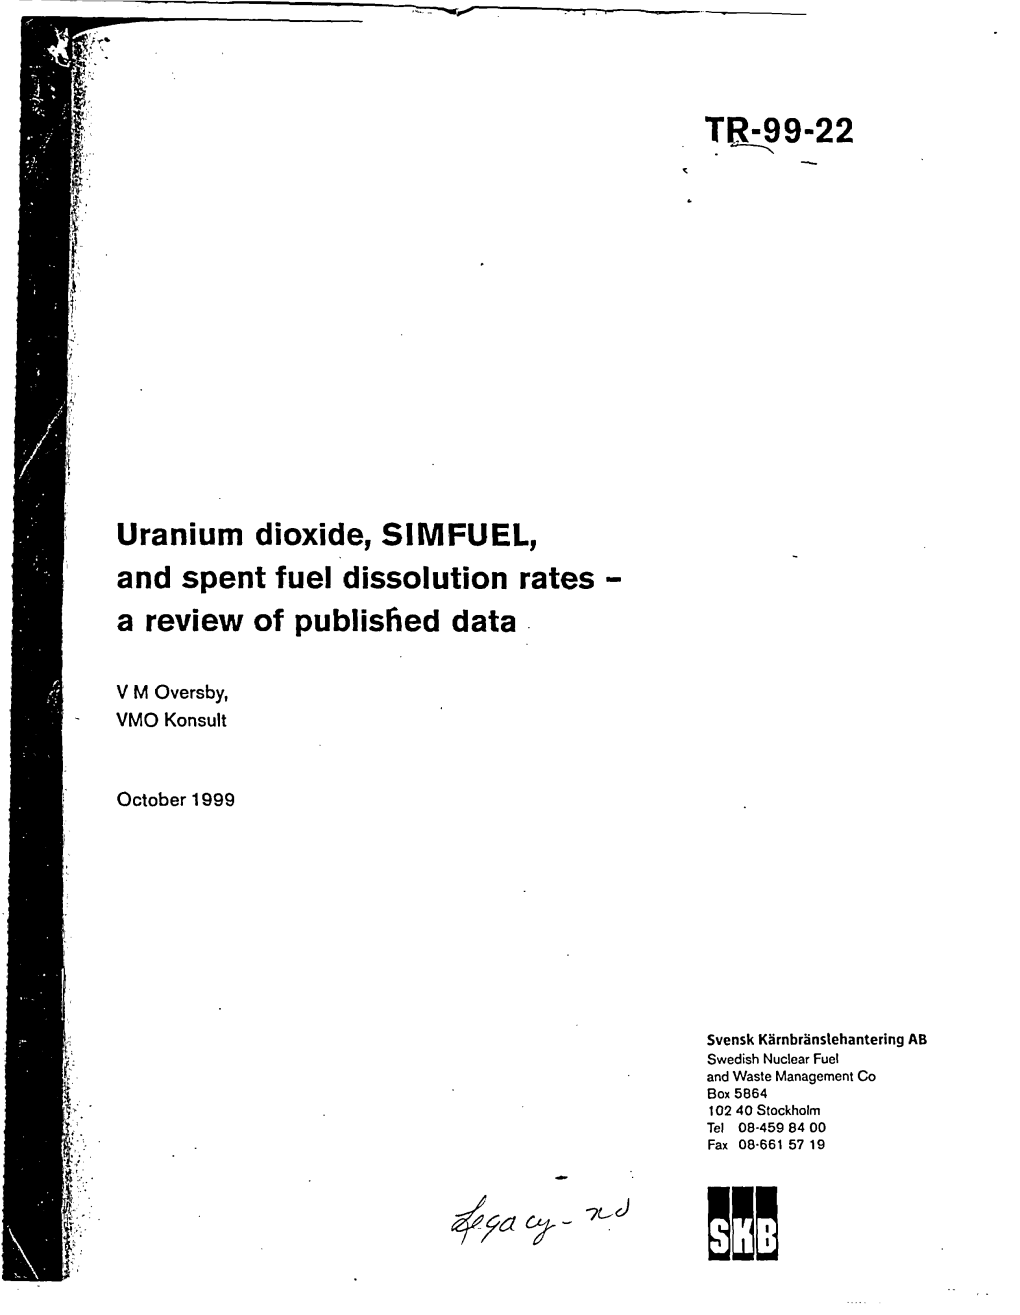 Uranium Dioxide, SIMFUEL, and Spent Fuel Dissolution Rates - a Review of Published Data